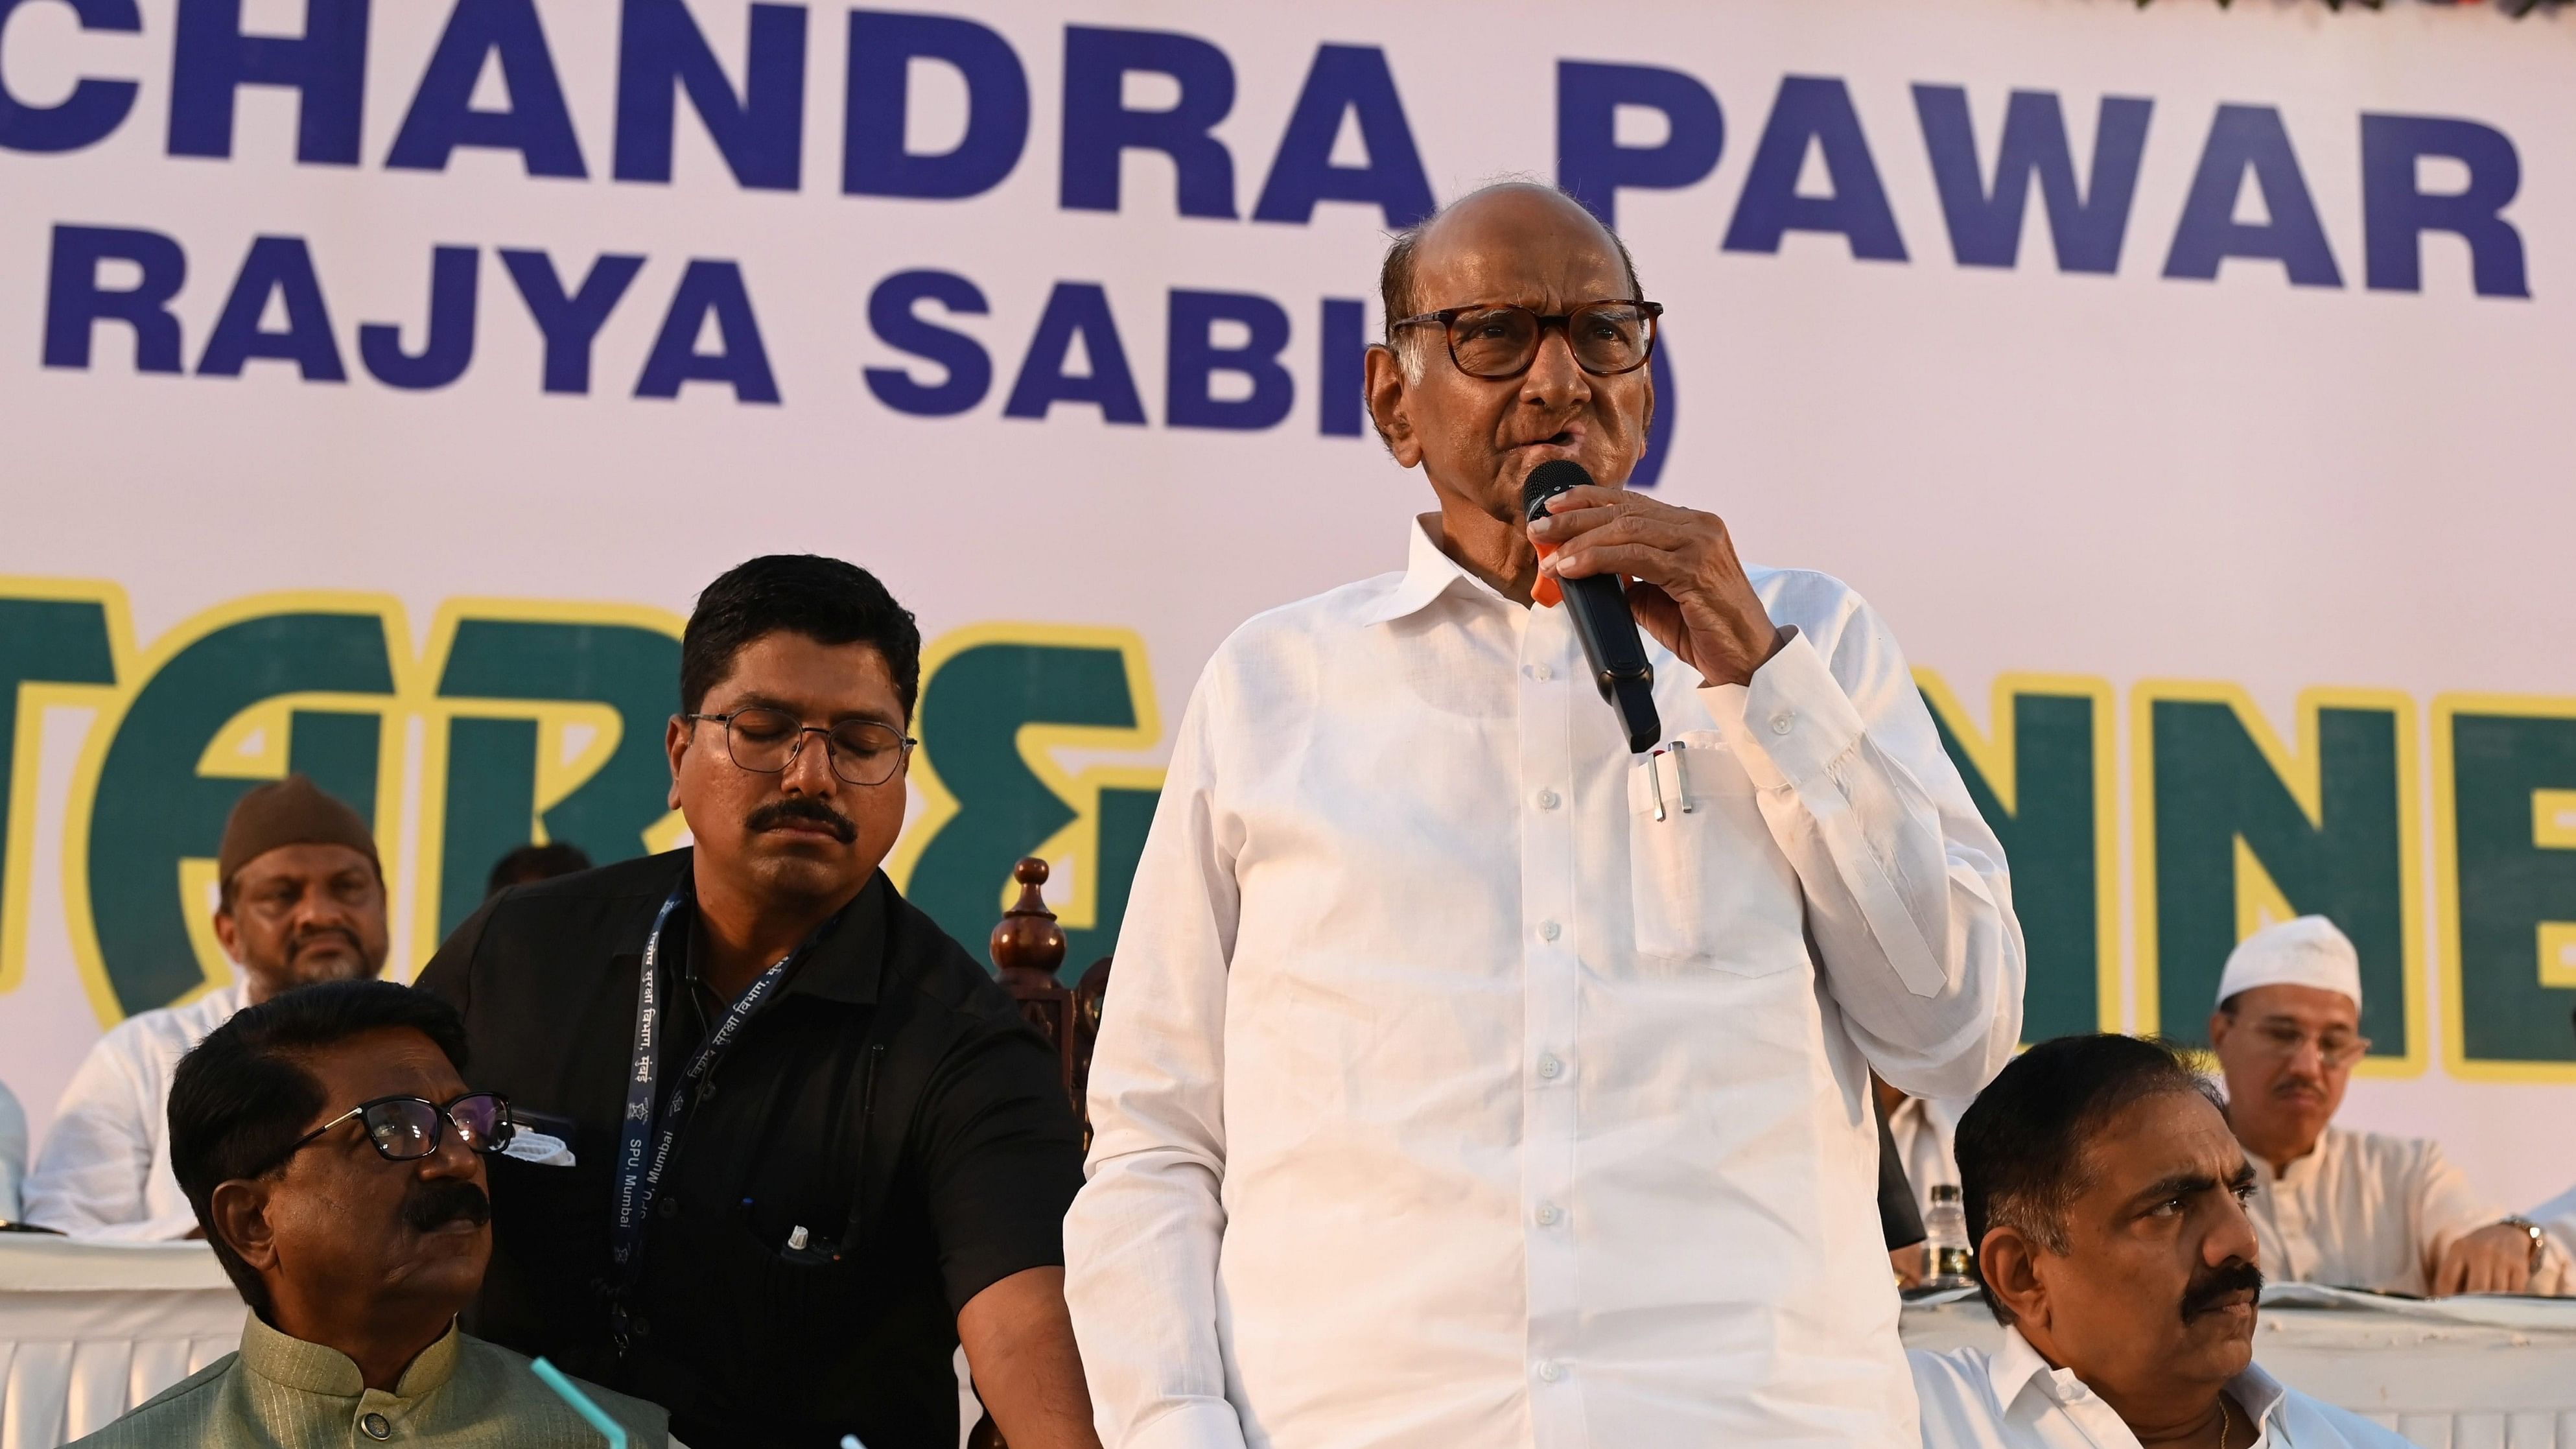 <div class="paragraphs"><p>NCP (Sharadchandra Pawar) Party President Sharad Pawar and others during an Iftar party during the holy month of Ramzan, at Islam Gymkhana, in Mumbai.</p></div>